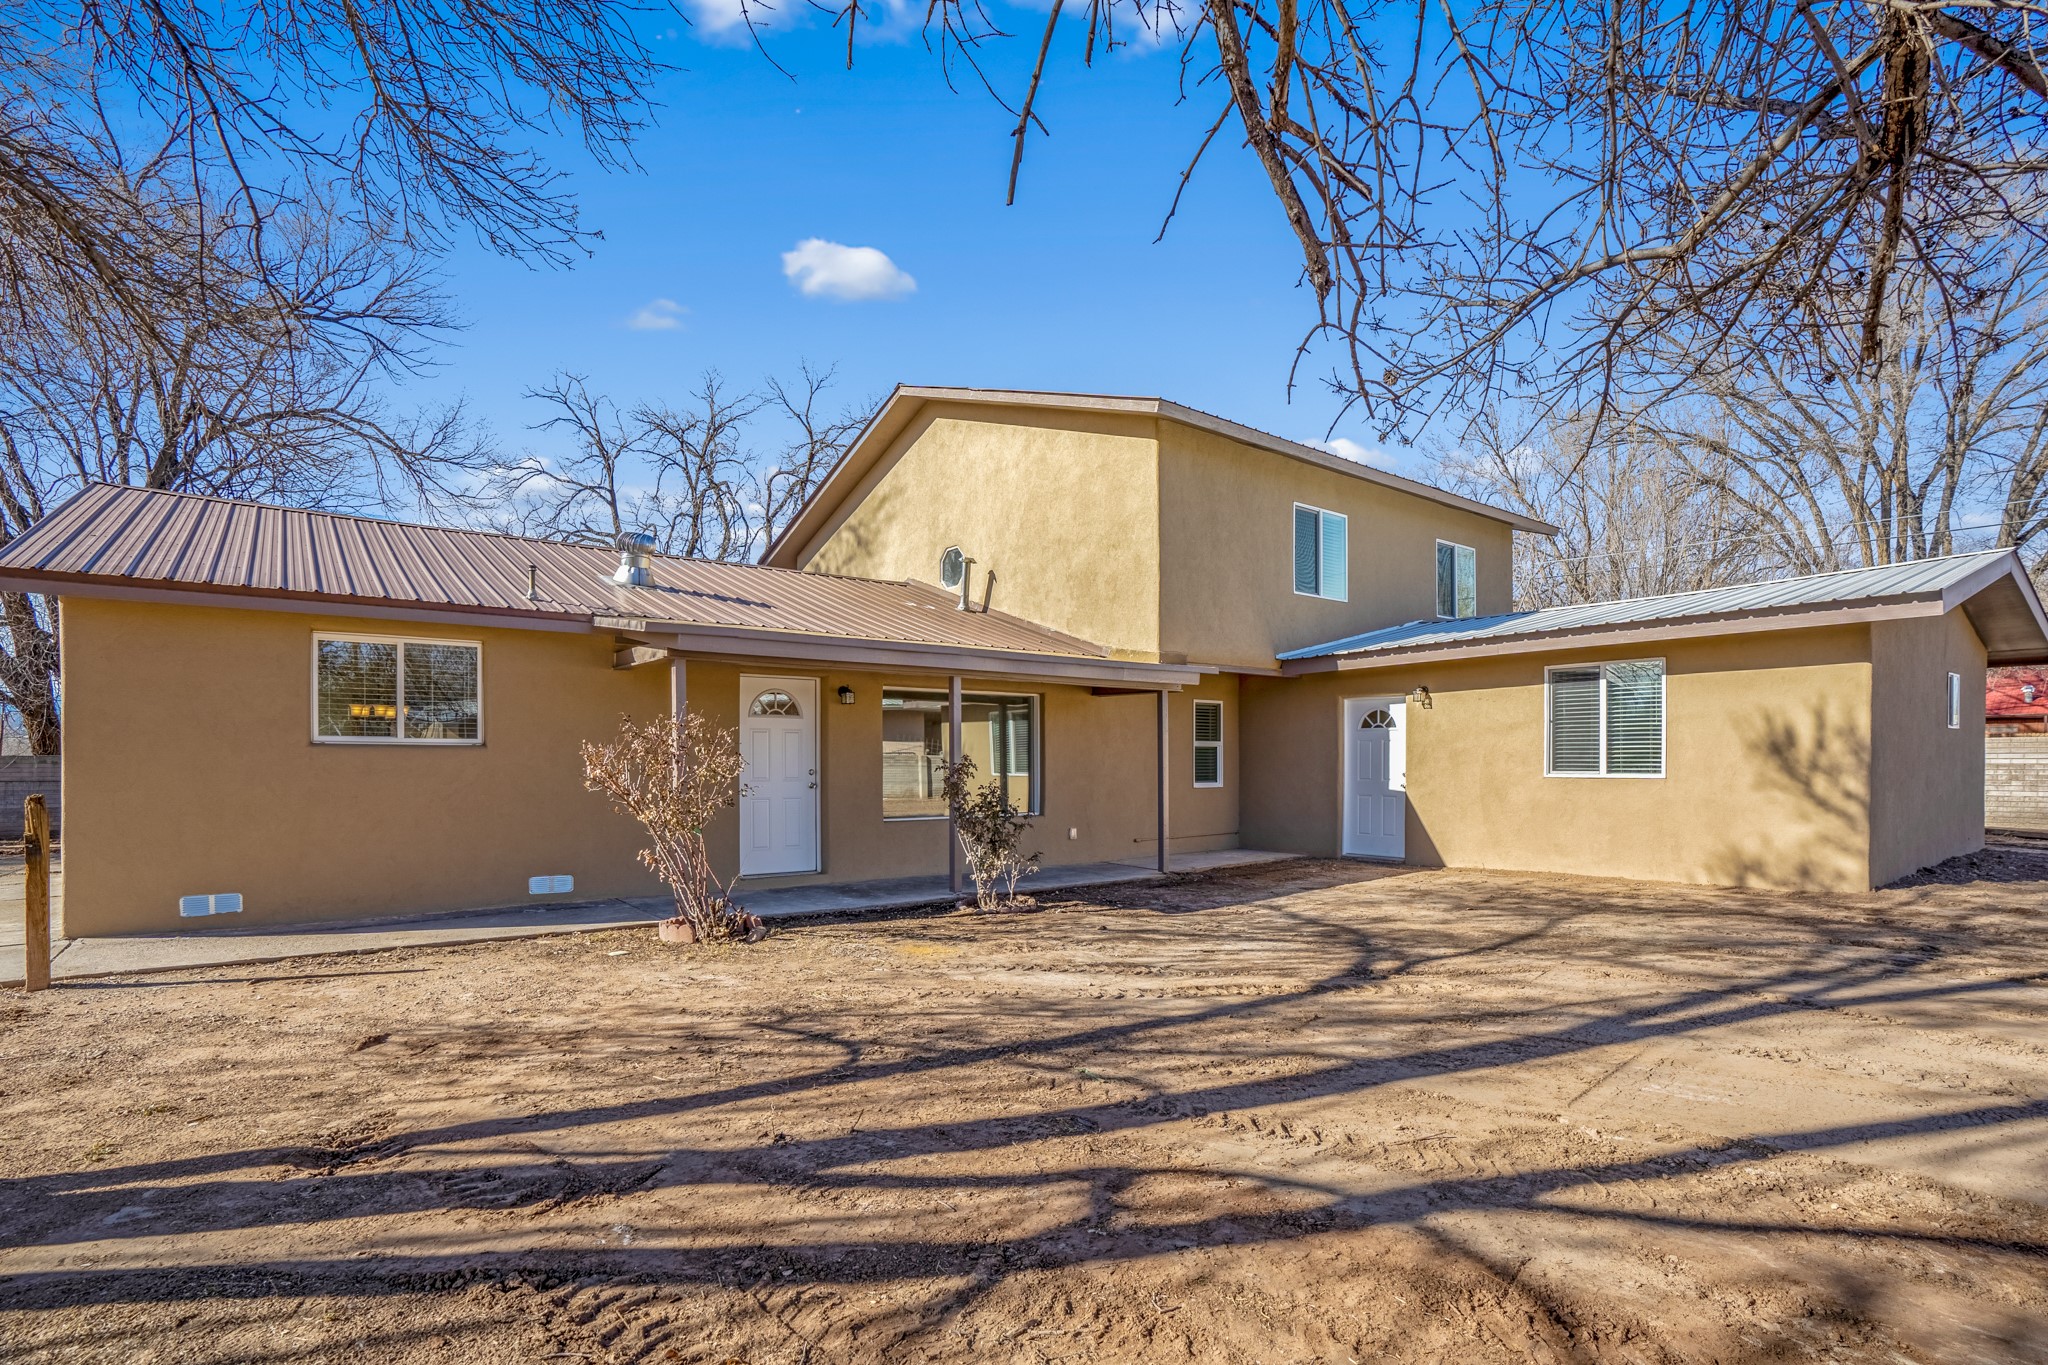 603 Fairview, Espanola, New Mexico 87532, 4 Bedrooms Bedrooms, ,3 BathroomsBathrooms,Residential,For Sale,603 Fairview,202234427